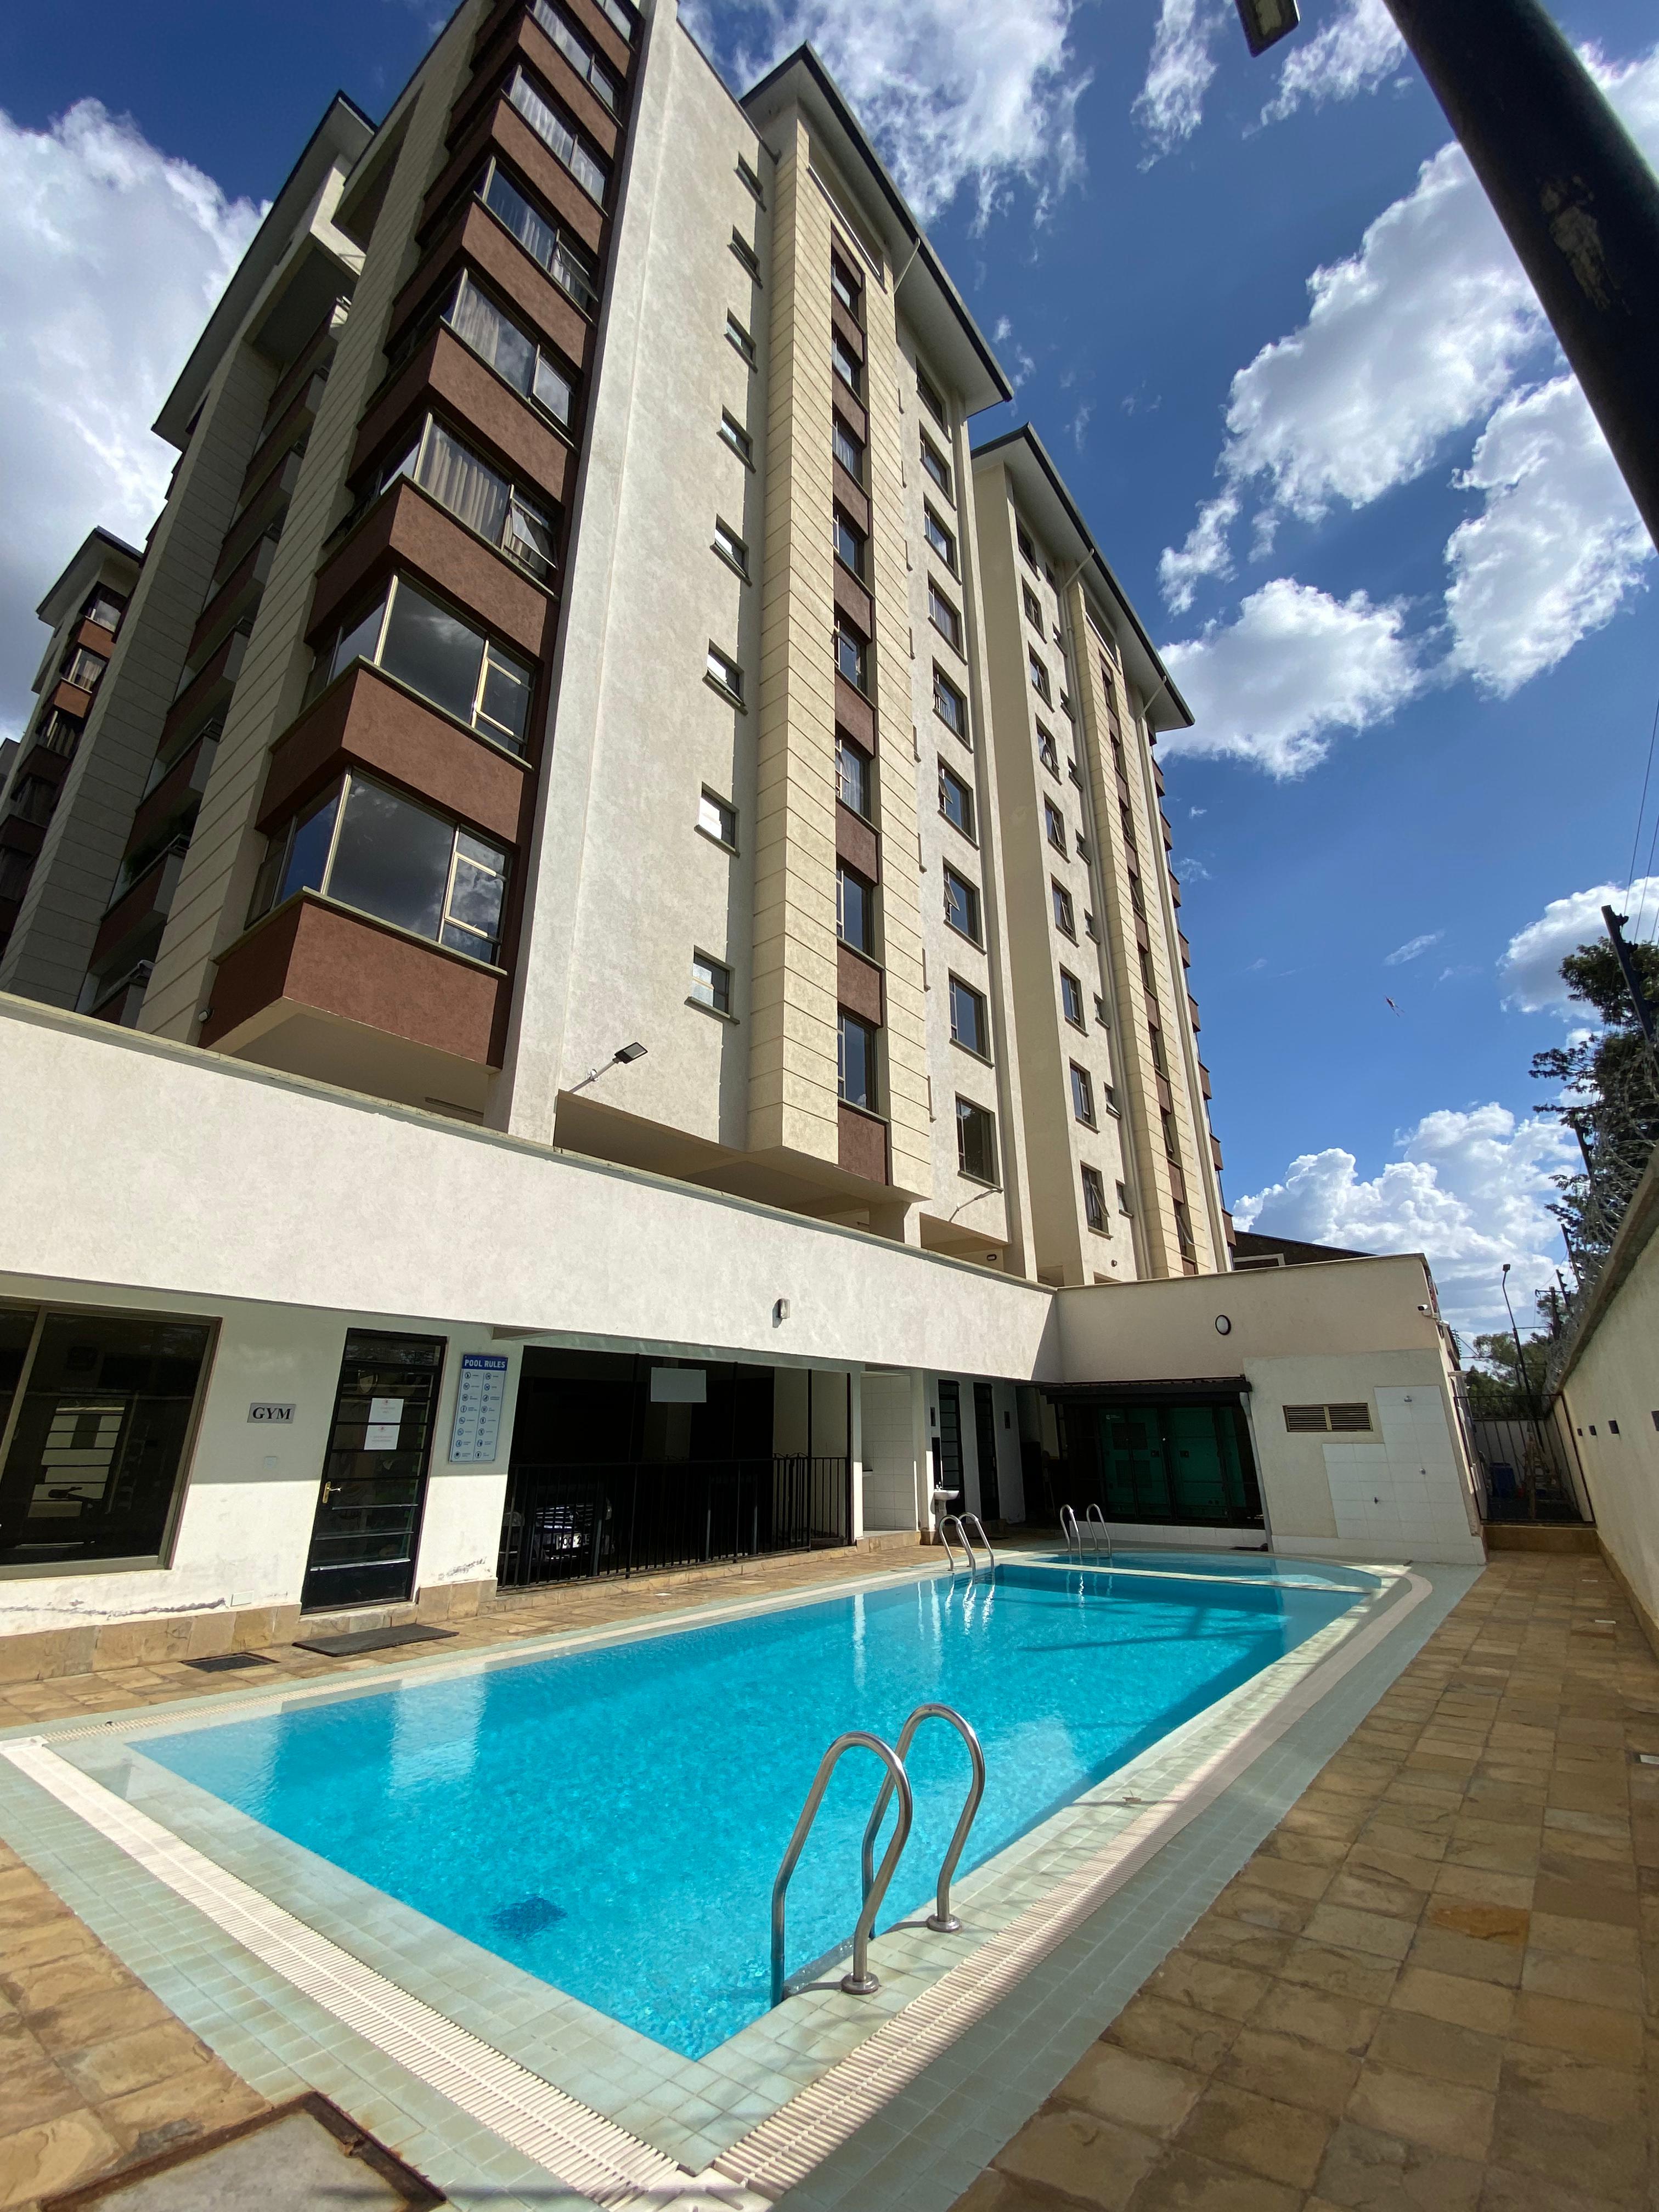 3 Bedroom Apartment For Sale off Thika Superhighway. Has a swimming pool, gym, back up generator and ample parking. Asking Price. 14.5 M.Musilli Homes.